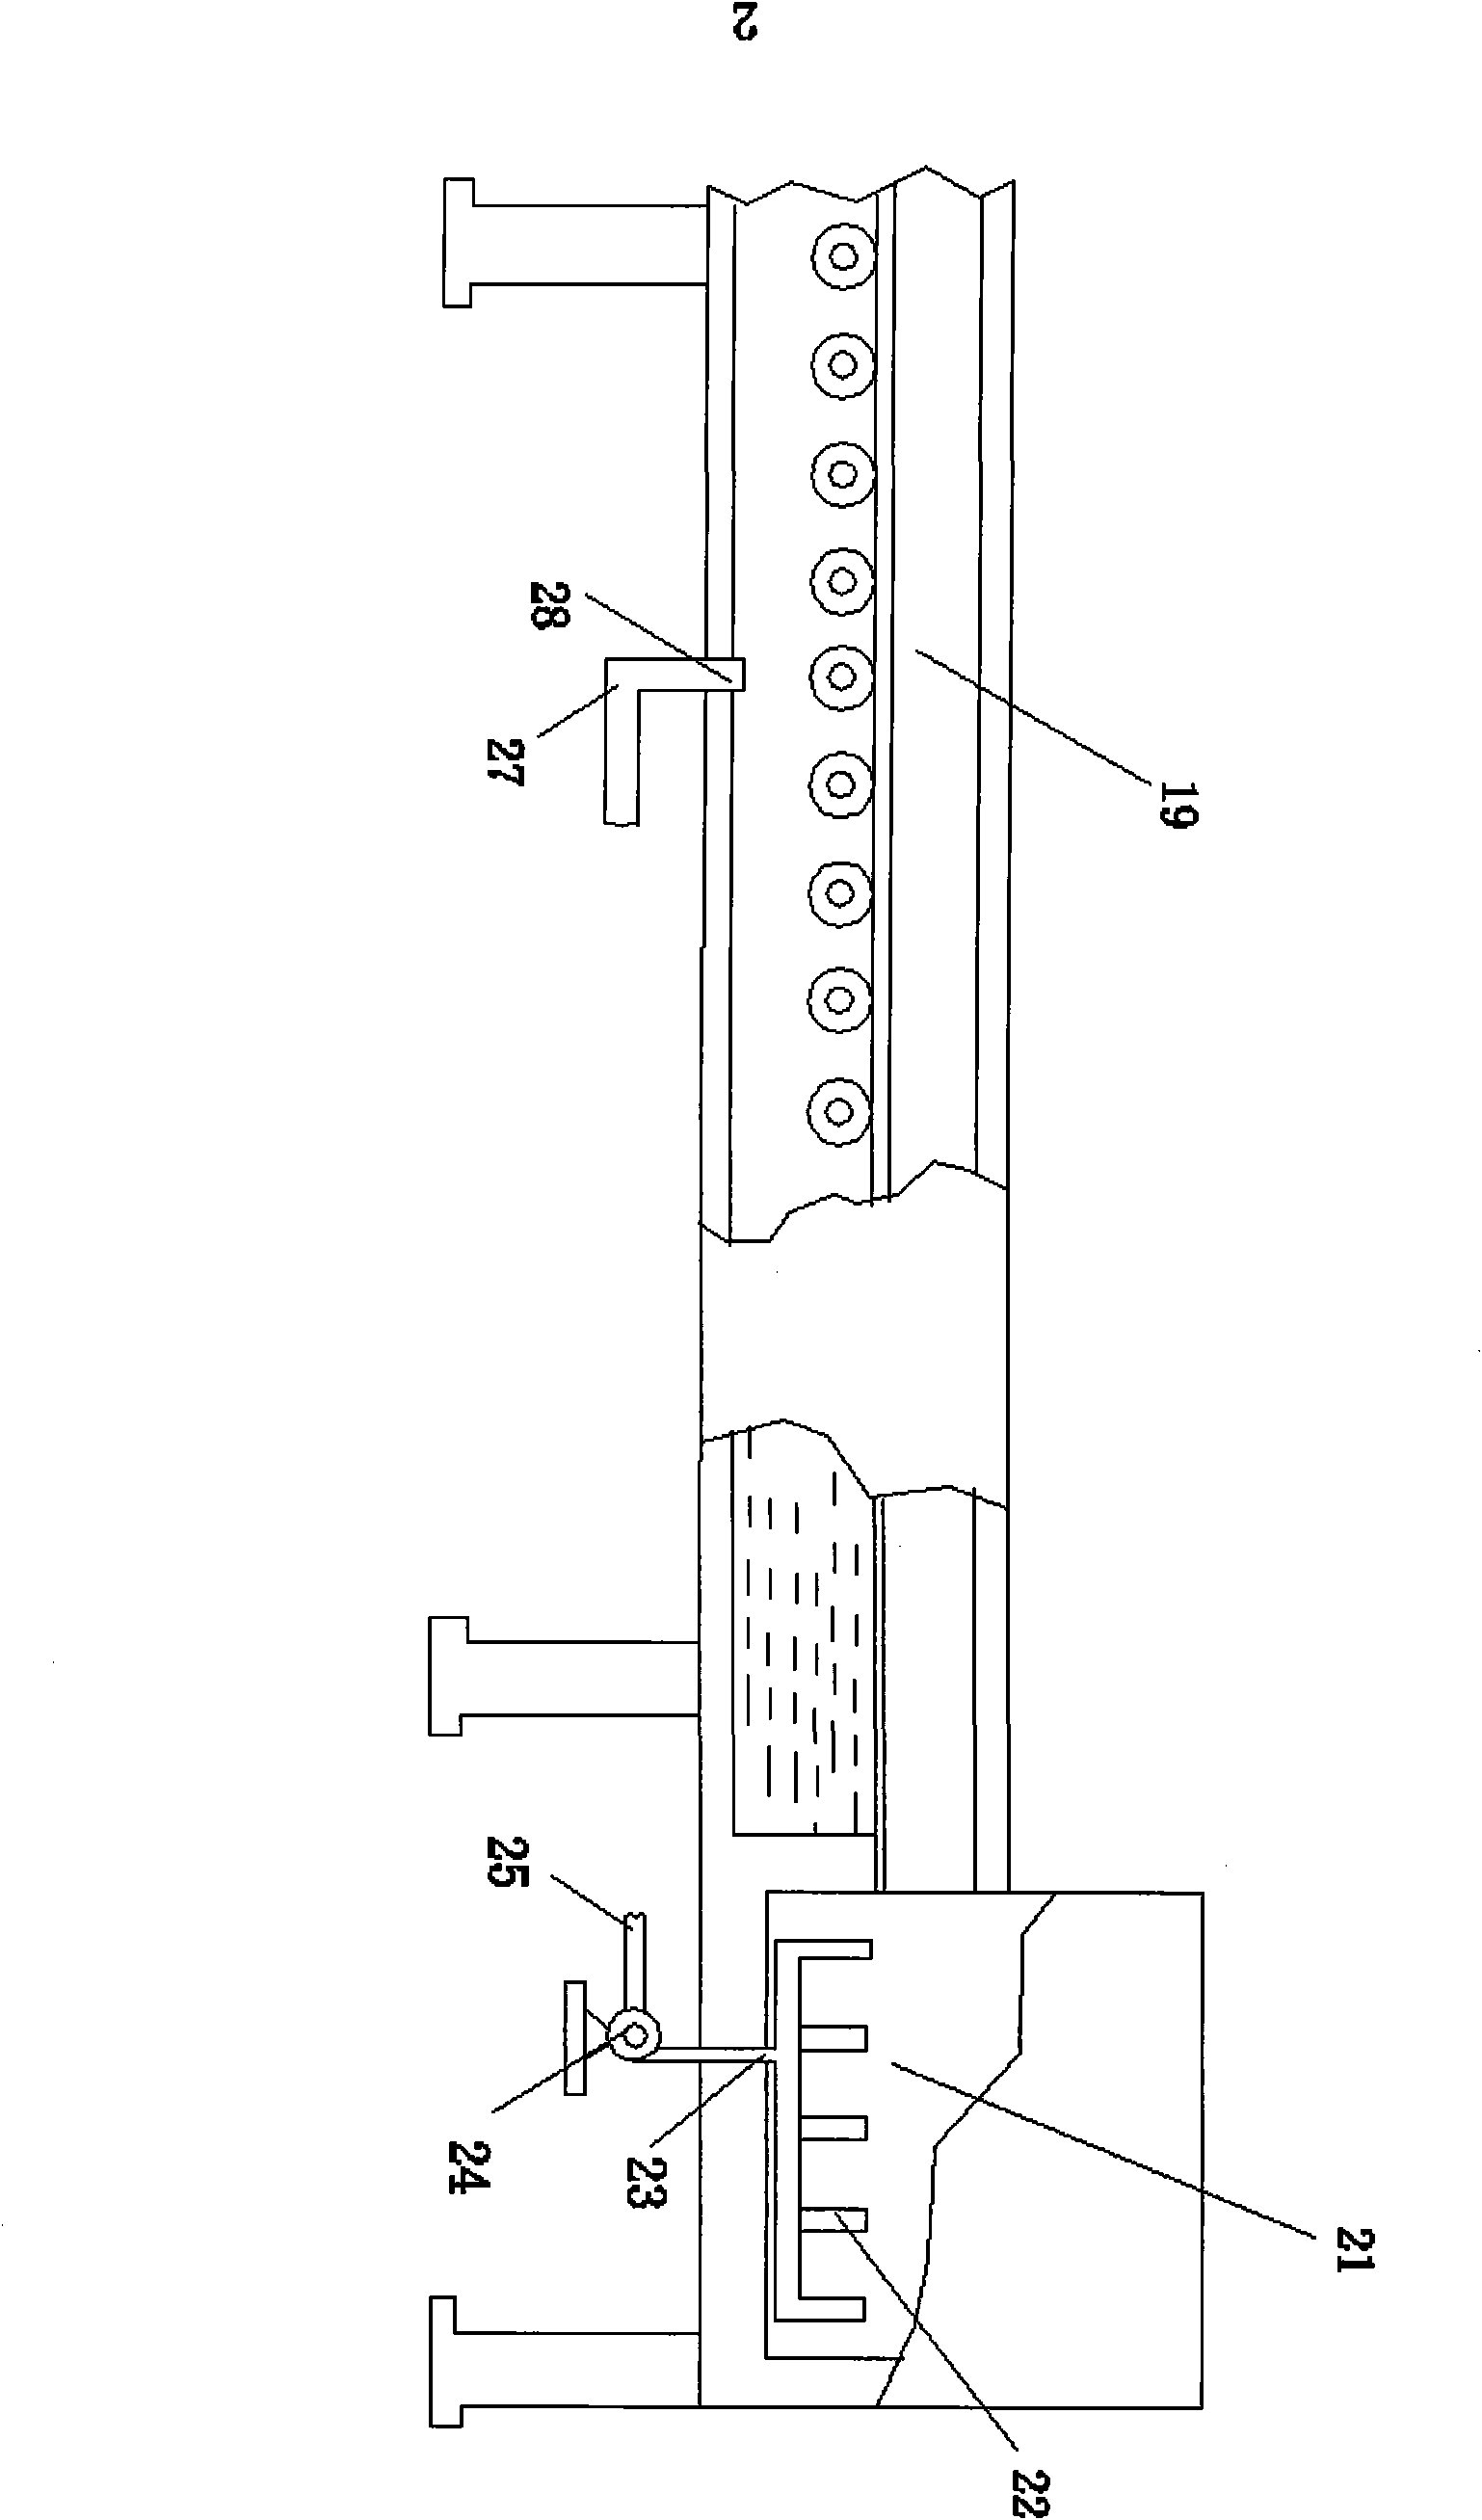 Hydrogen oxygen combustion-supporting device for improving combustion efficiencies of kiln in blown glass factory and boiler in power plant